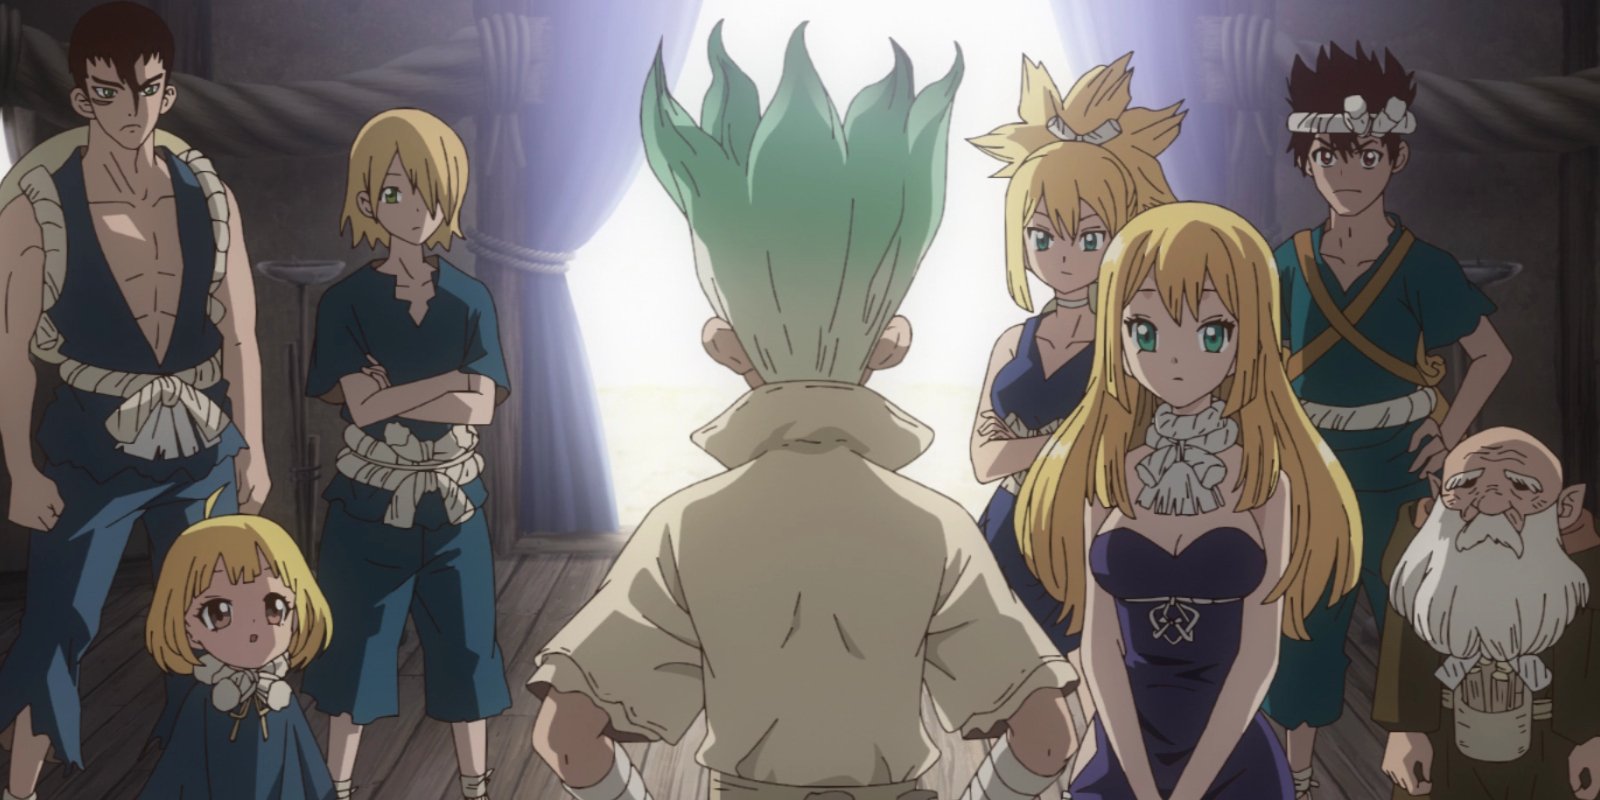 Seunku faces a group of key characters from Ishigami Villiage. 